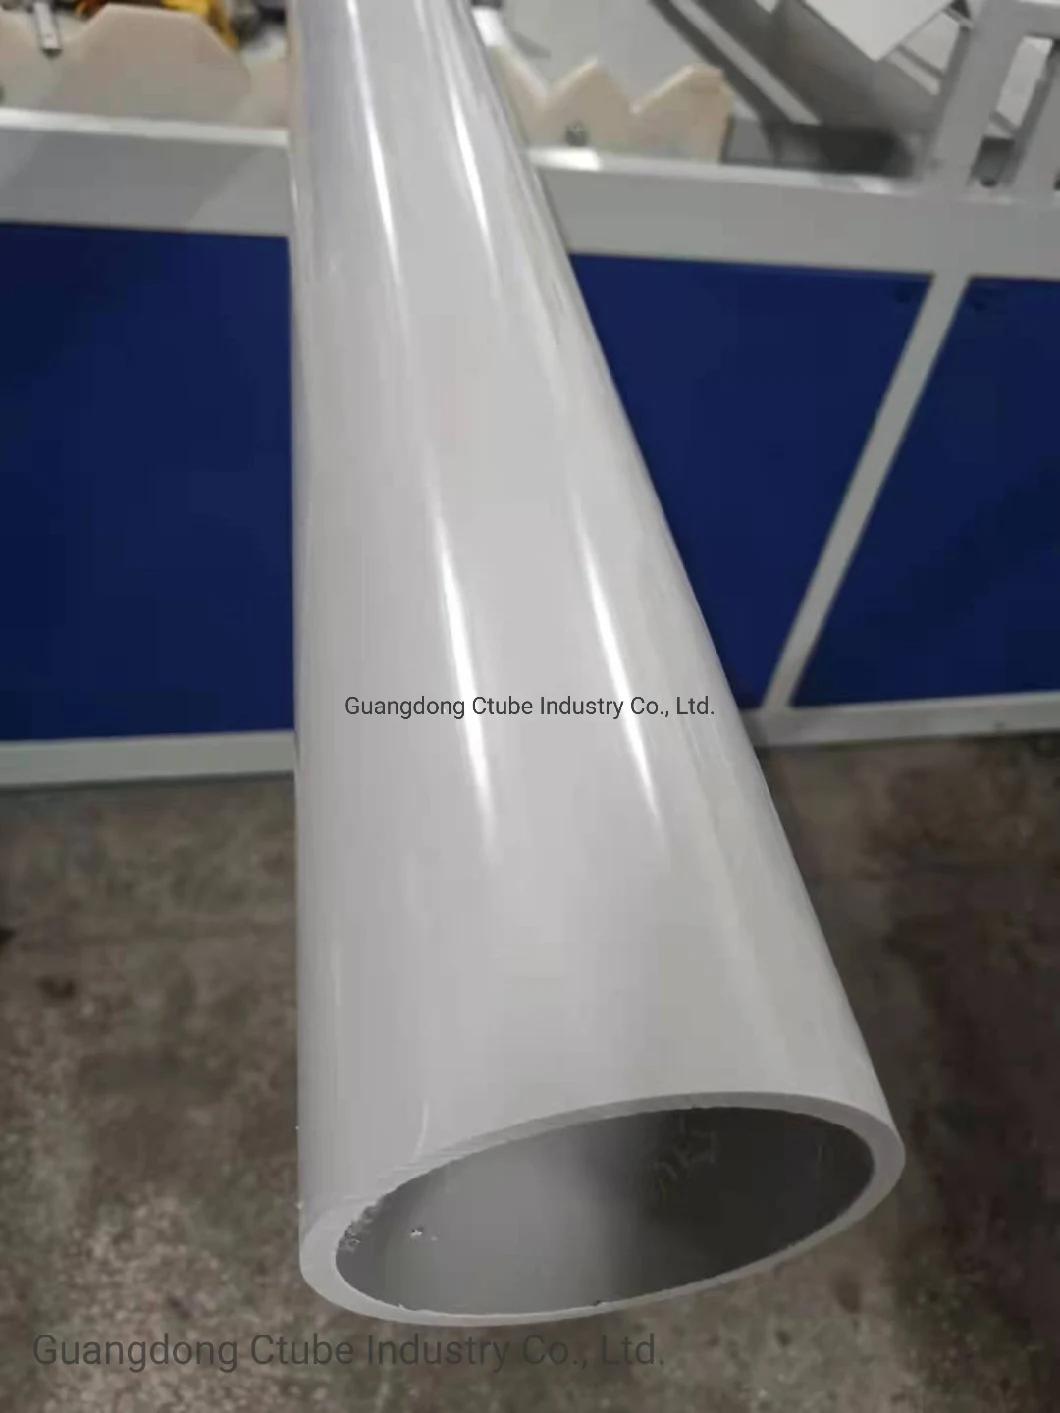 UL651 Standard for Safety of Schedule 40 and Schedule 80 Rigid UL PVC Electrical Conduit